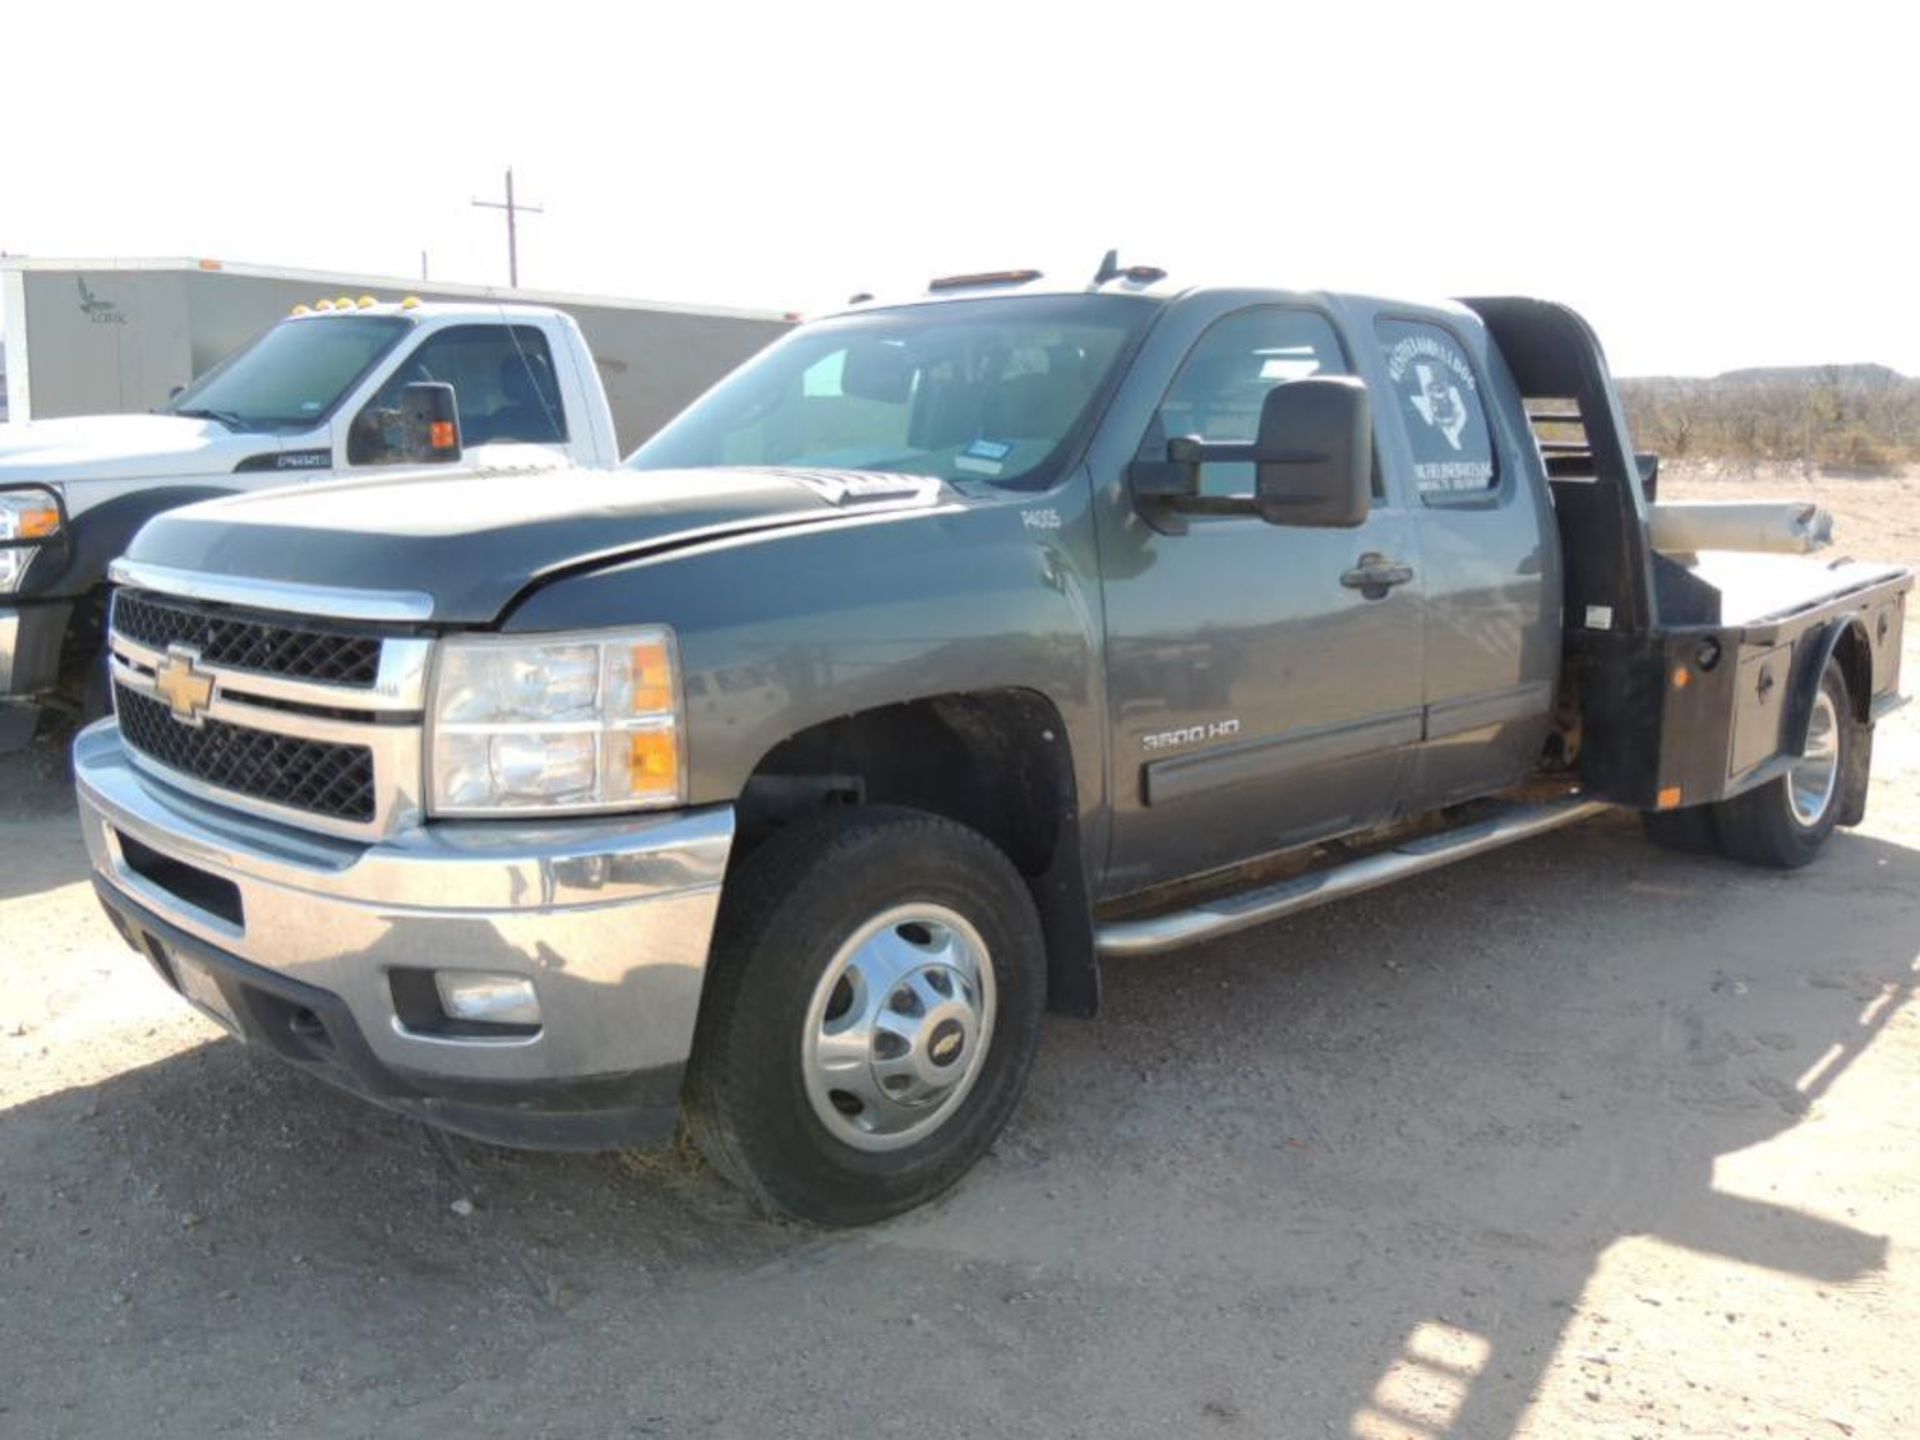 2011 Chevrolet 3500 HD Pick-up Truck, VIN 1GC5K0CG0BZ238129, Dually, Extended Cab, 8 ft. 6 in. Flat